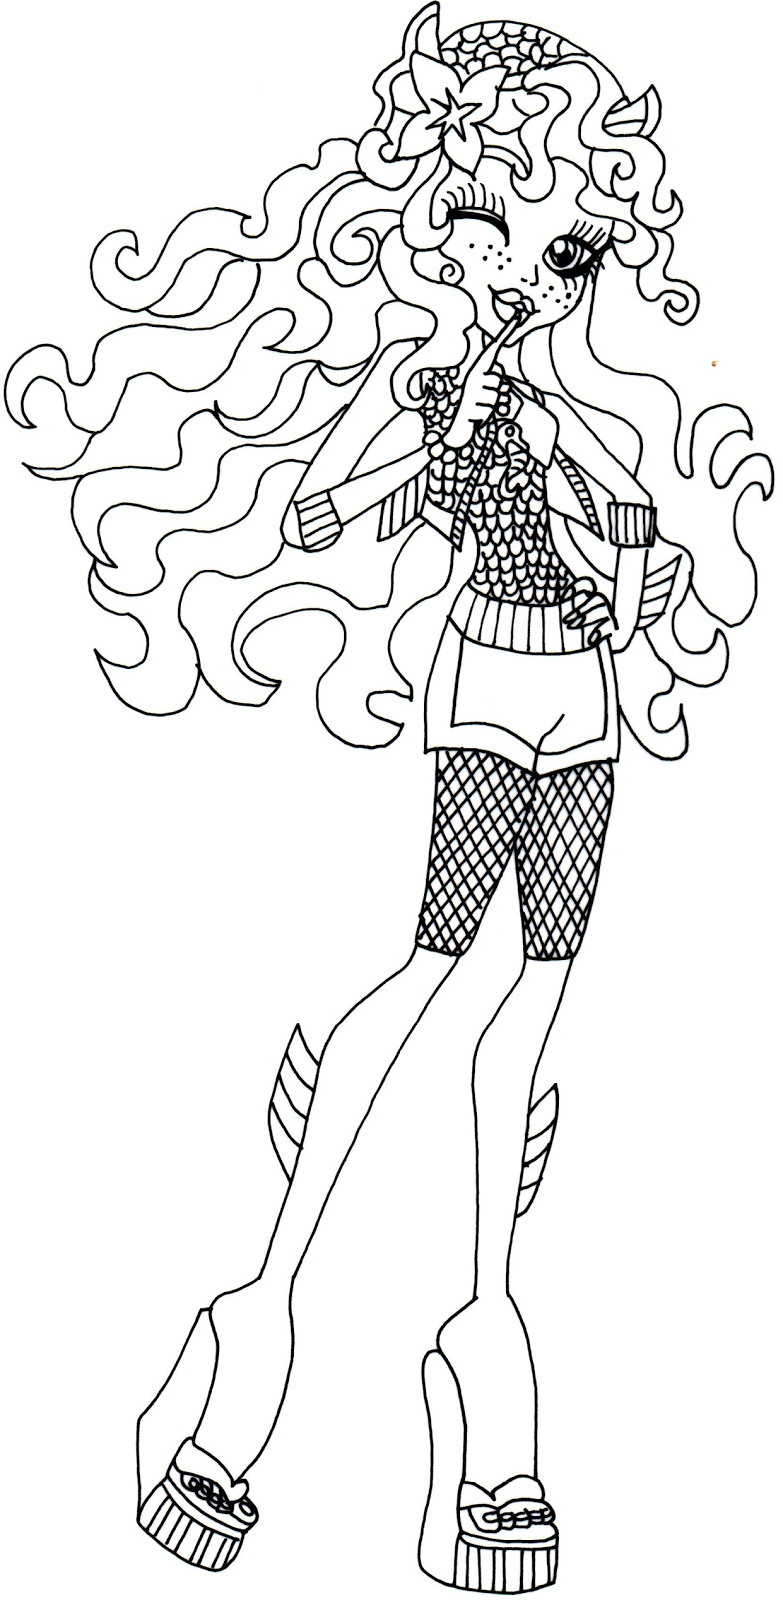 Free printable monster high coloring page for Lagoona Blue secret creepers